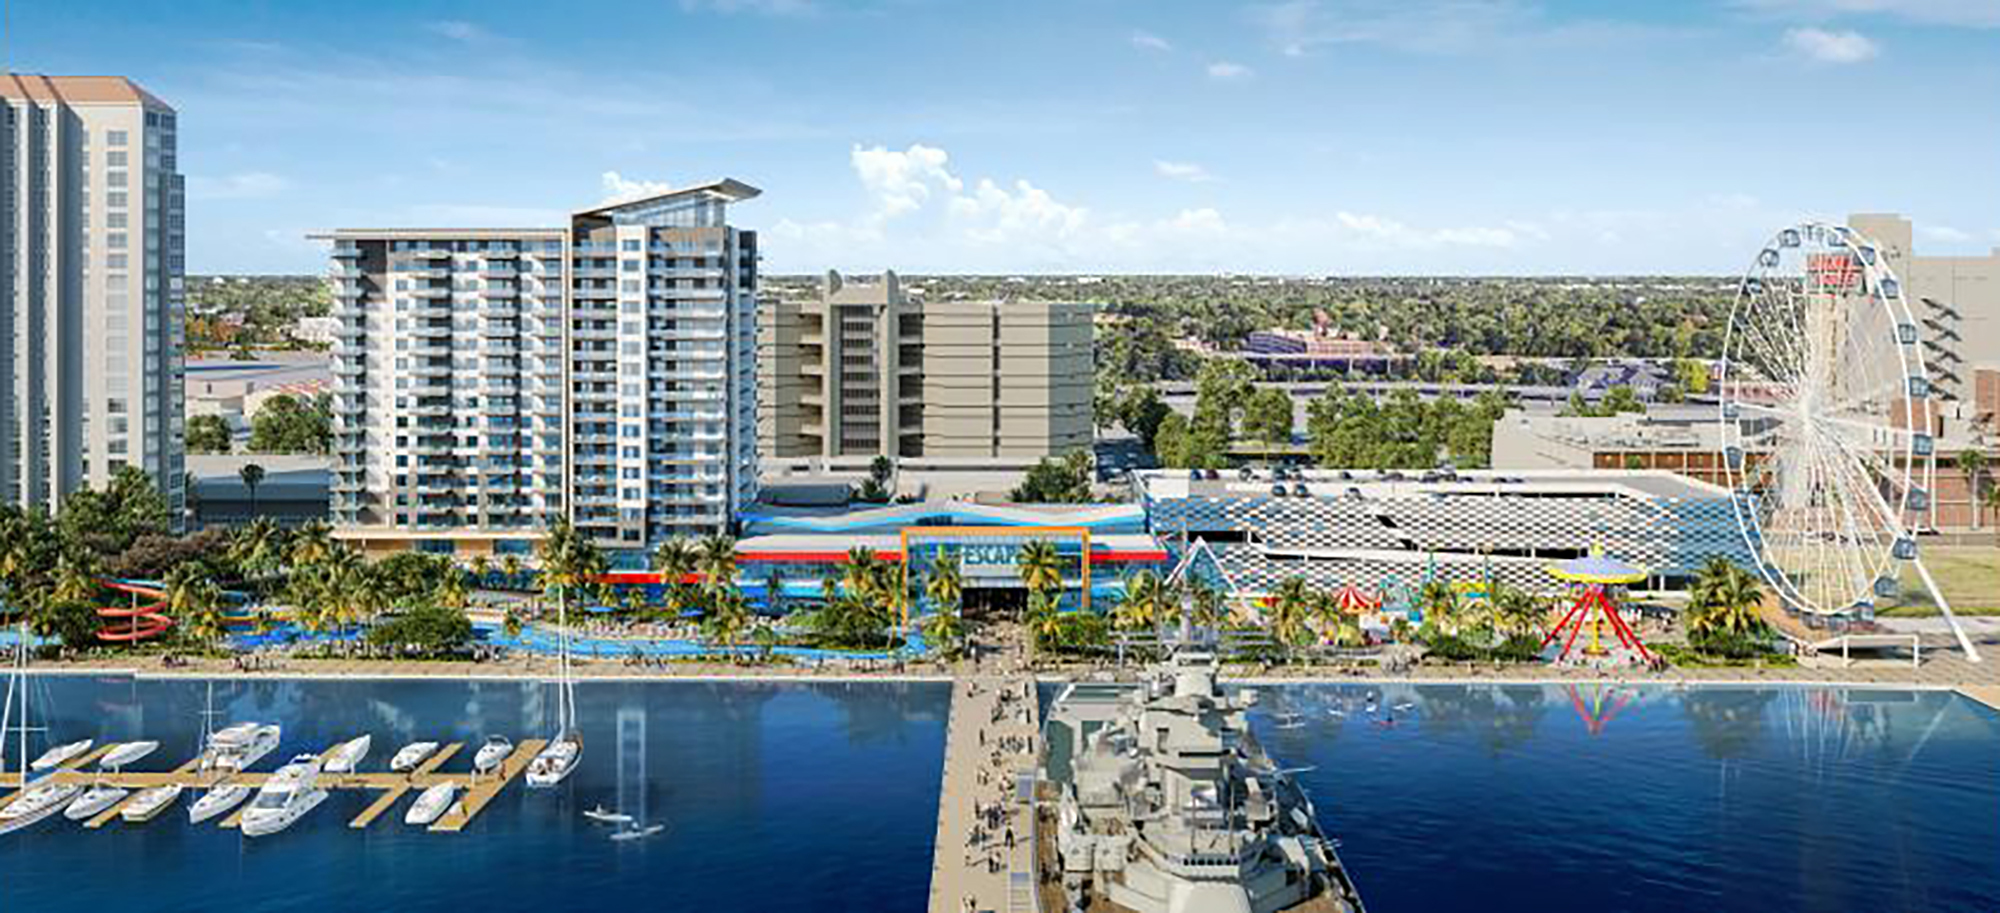 An artist's rendering of the redeveloped Berkman Plaza II condominium property shows the USS Charles F. Adams  docked nearby.